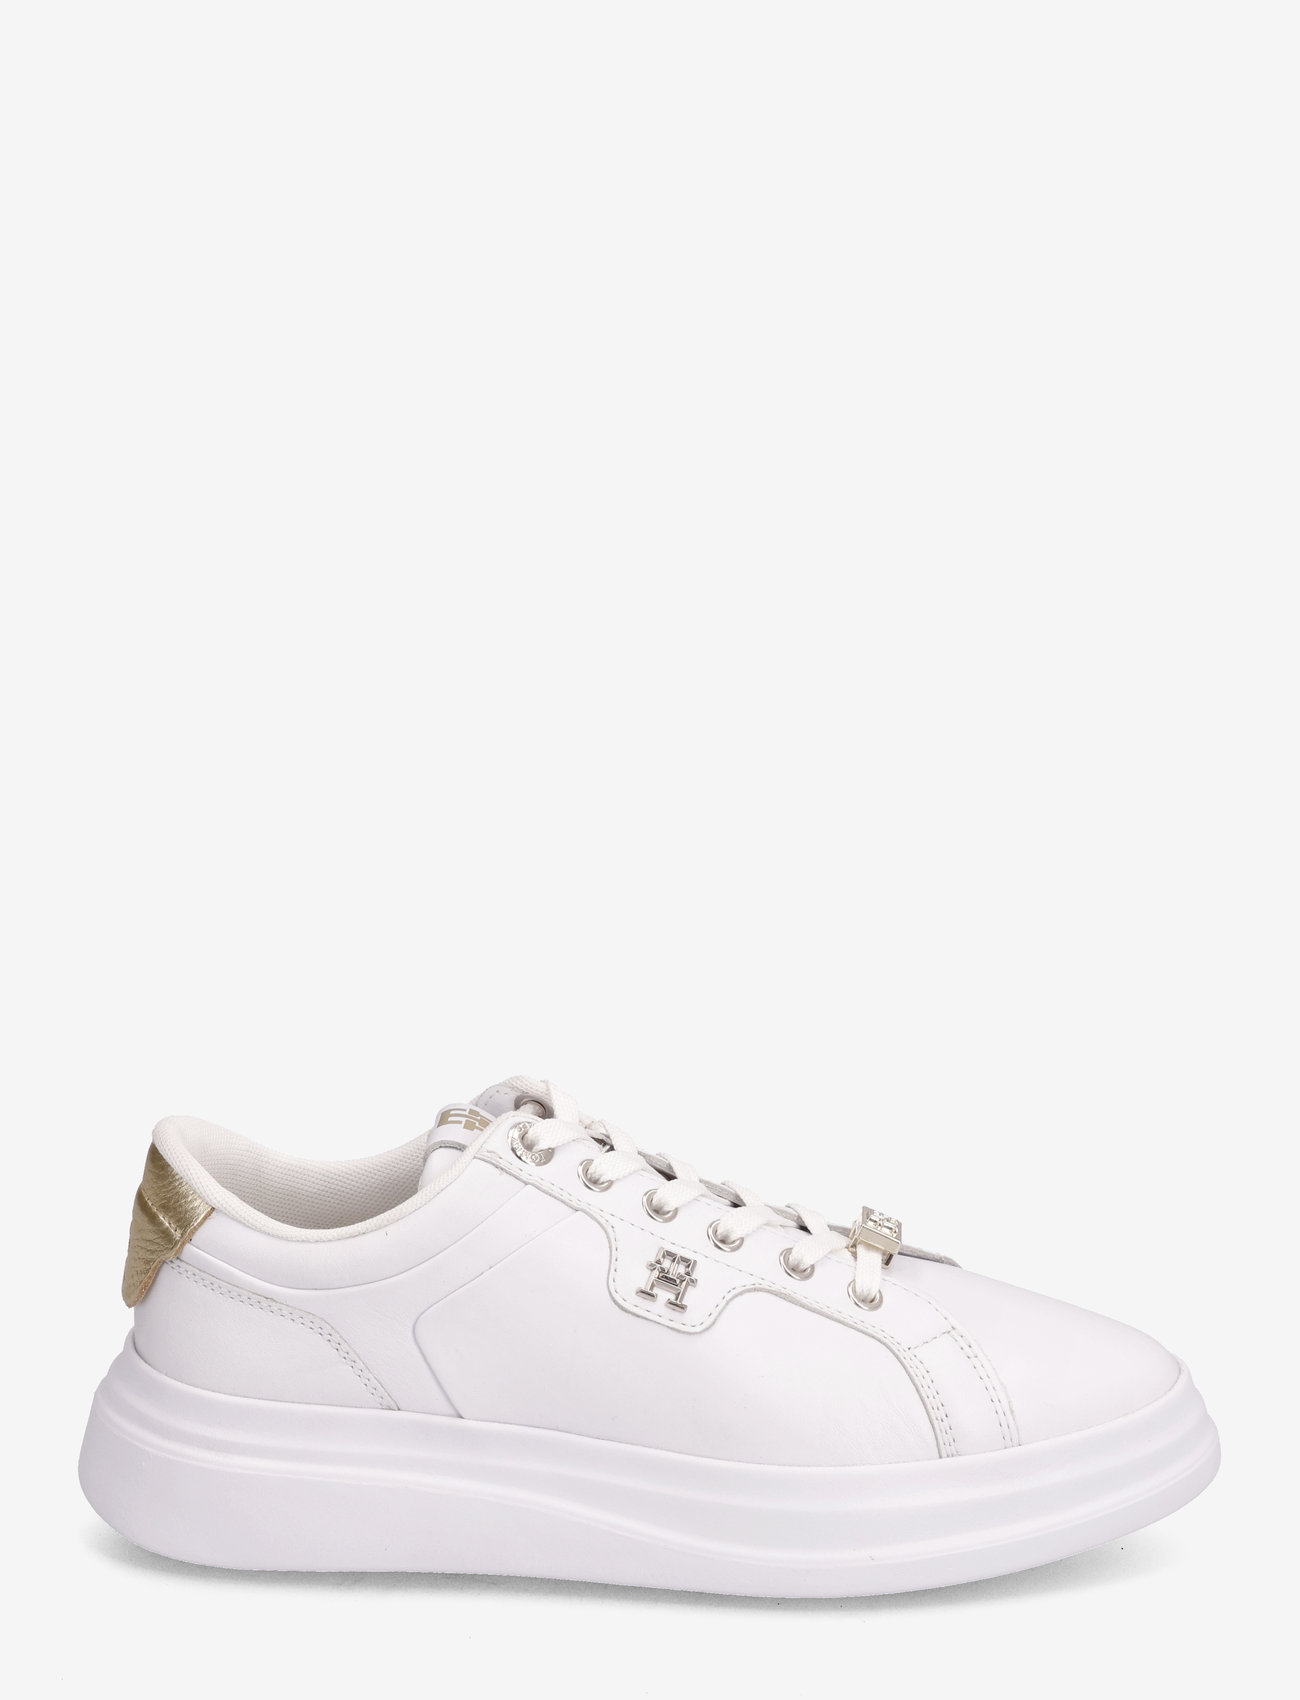 Tommy Hilfiger - POINTY COURT SNEAKER HARDWARE - låga sneakers - white/gold - 1